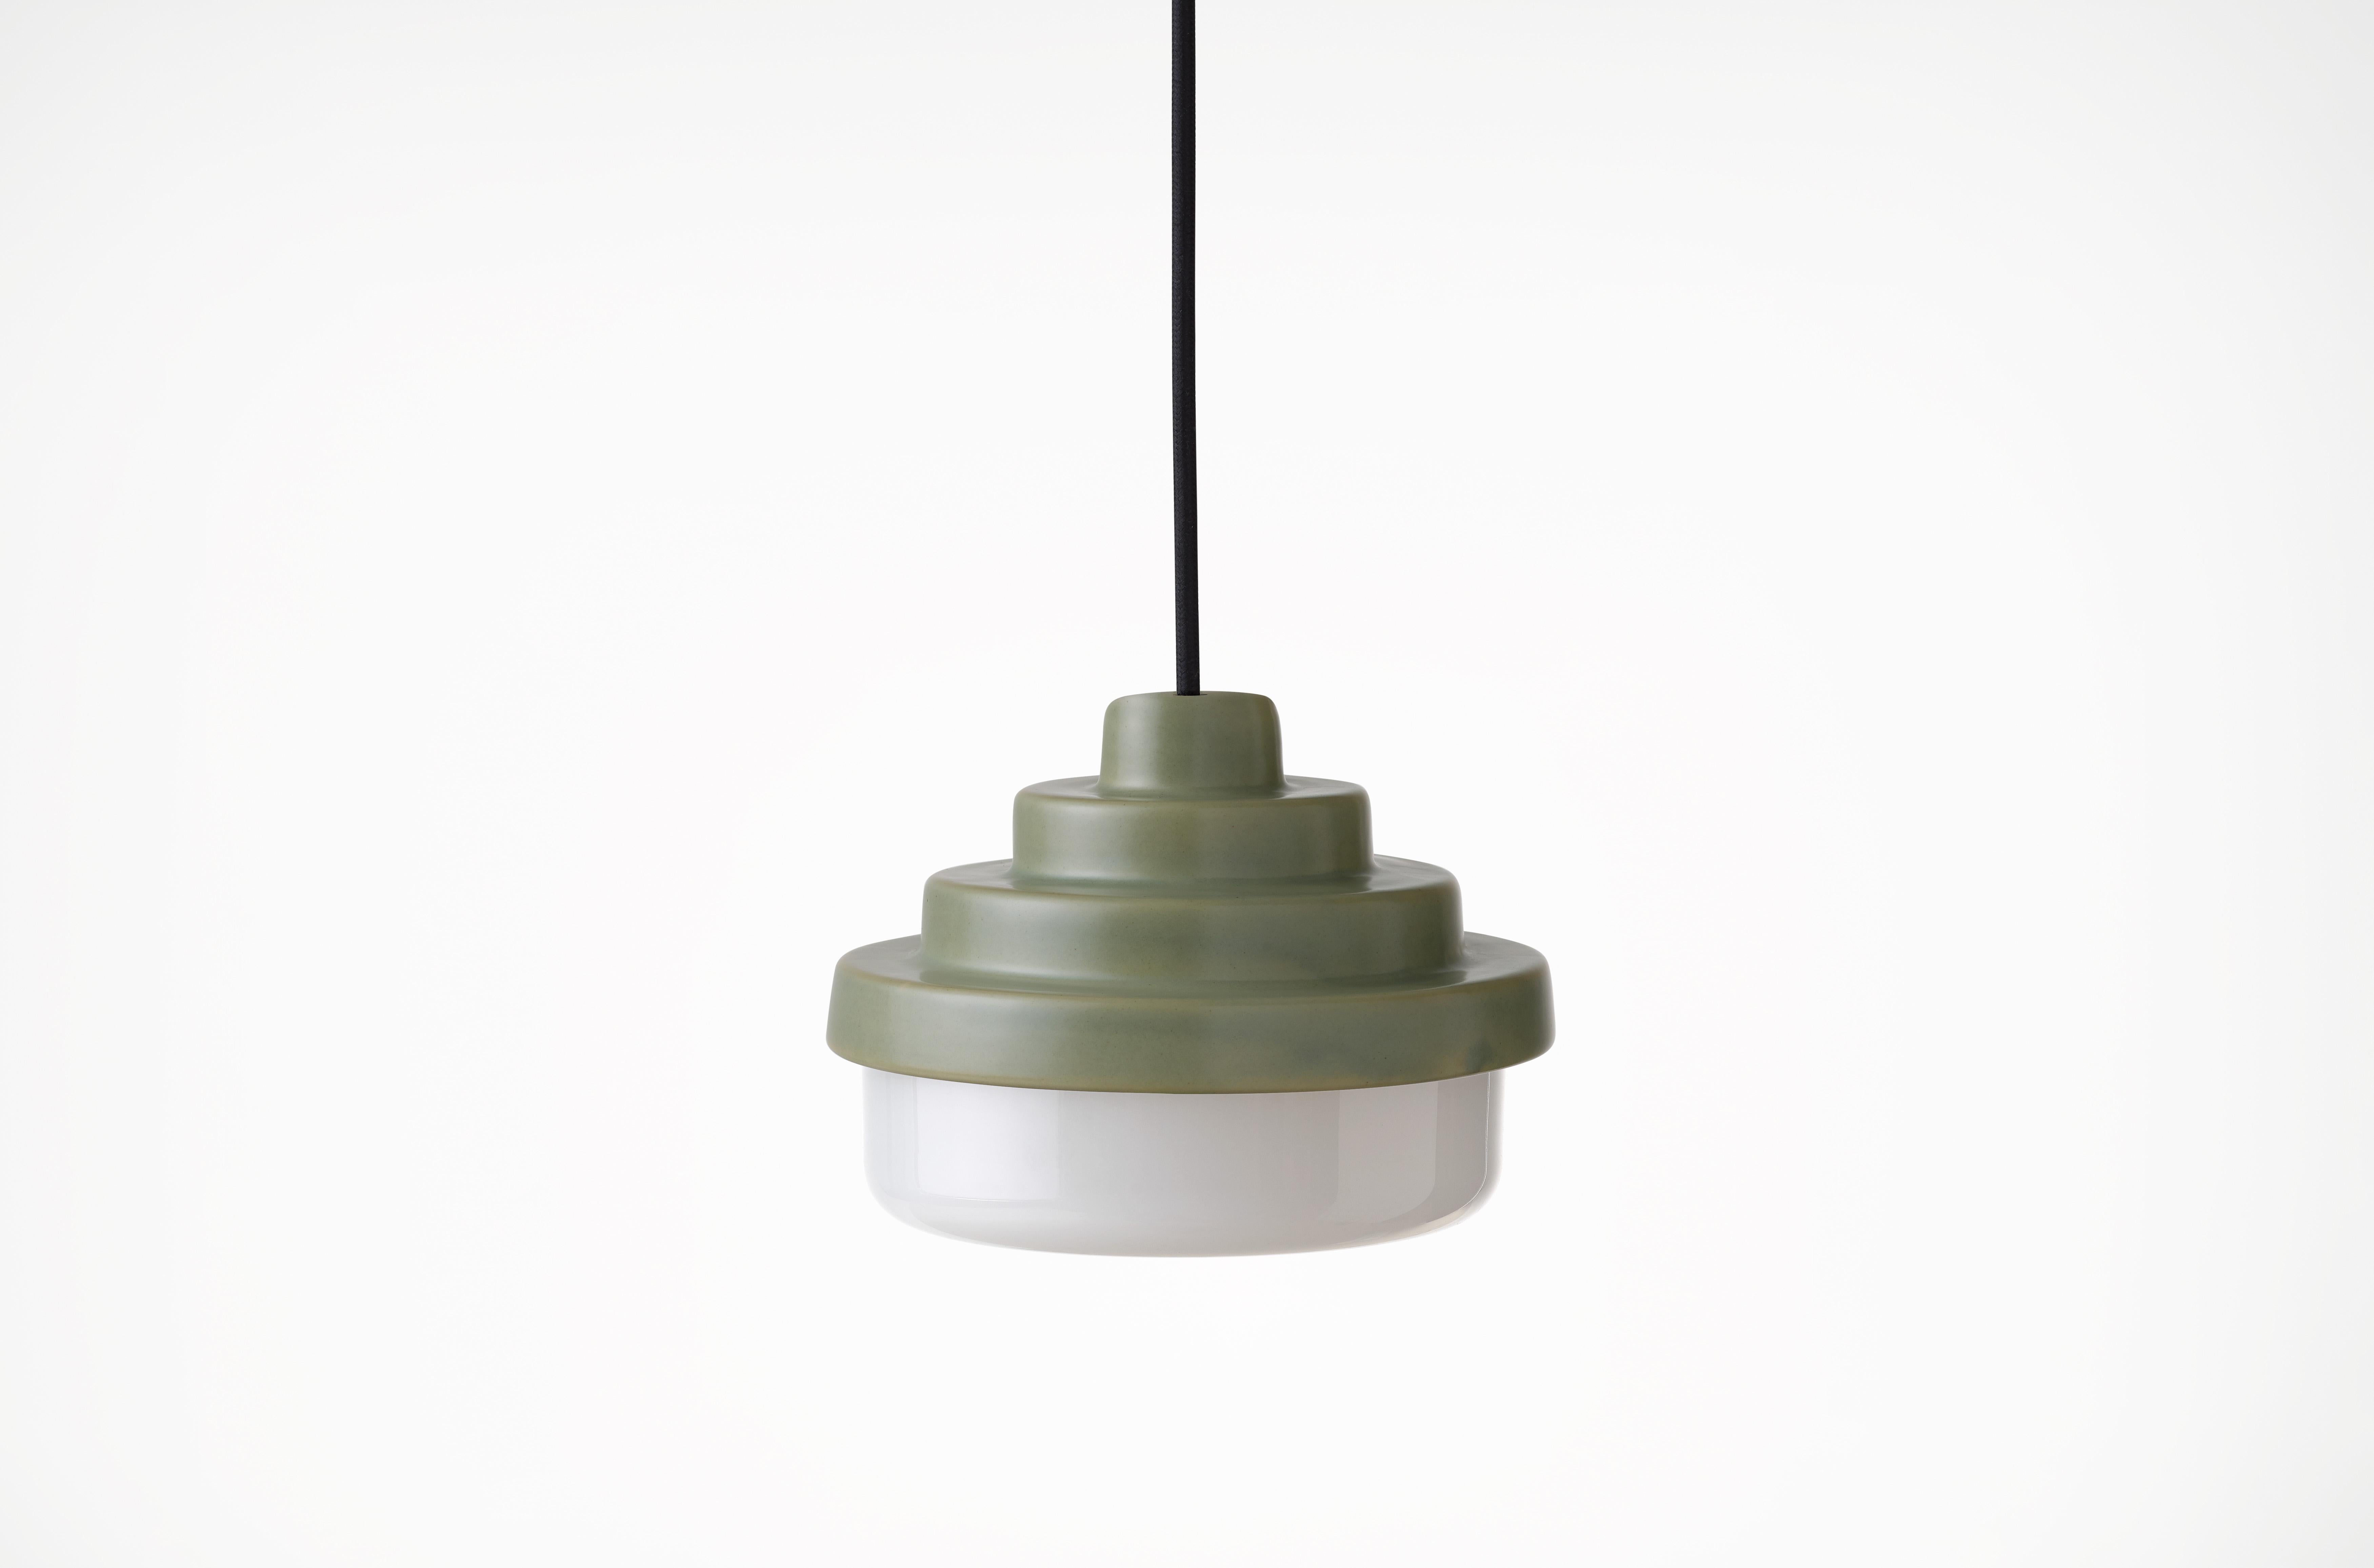 Green and White Honey Pendant Light by Coco Flip
Dimensions: D 18 x W 18 x H 13 cm
Materials: Slip cast ceramic stoneware with blown glass. 
Weight: Approx. 2kg
Glass finishes: White.
Ceramic finishes: Green satin glaze. 

Standard fixtures